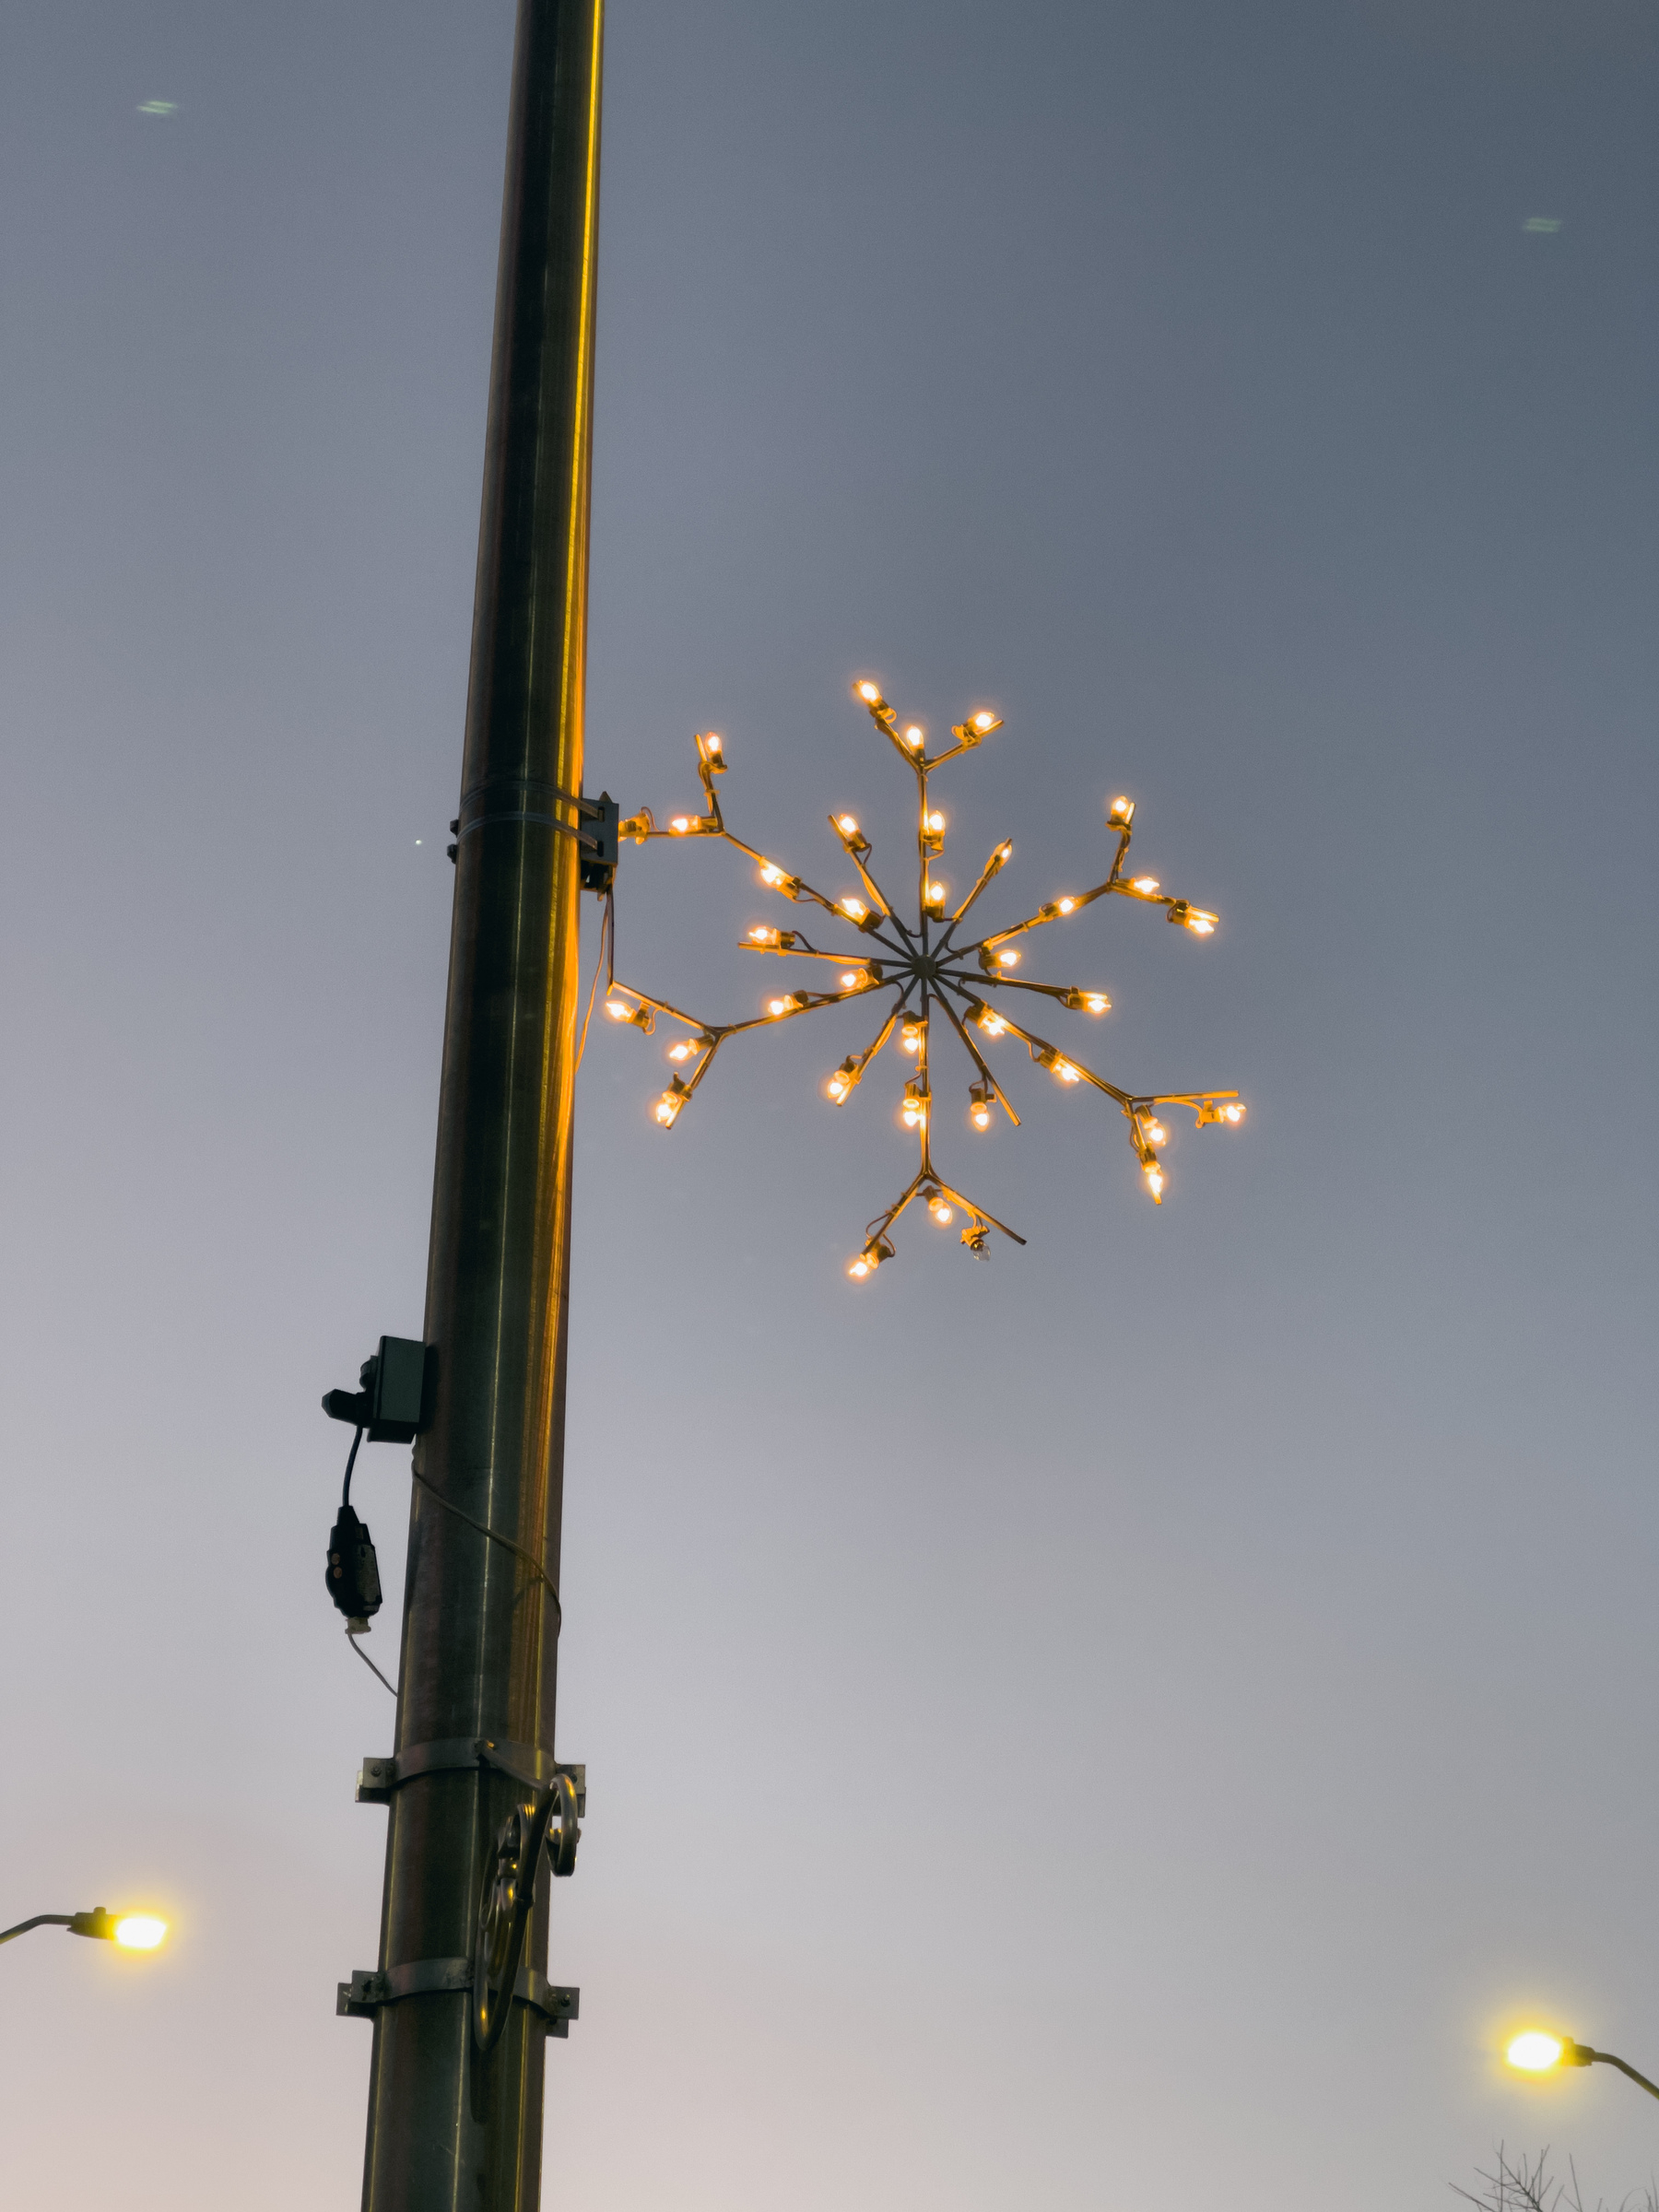 Christmas snowflake decoration lights attached to utility pole,